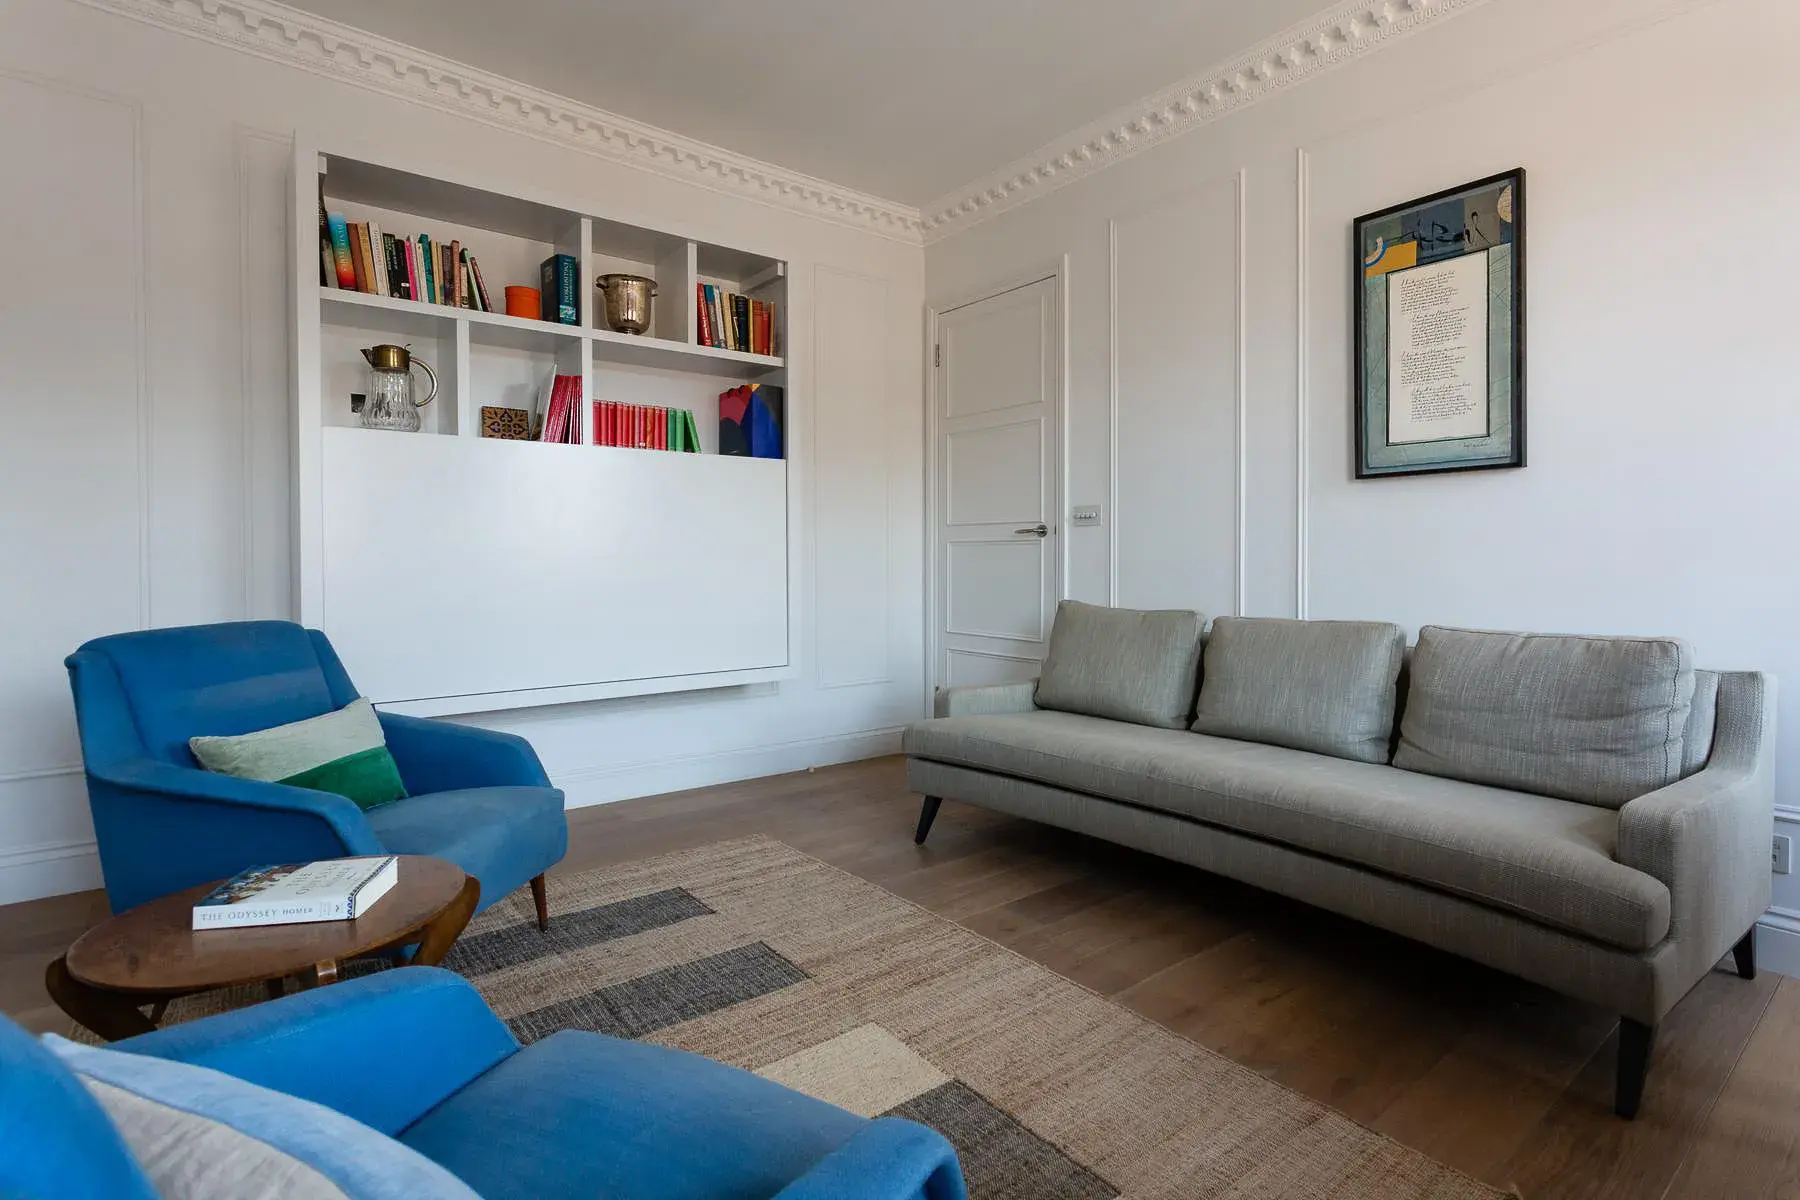 Cresswell Gardens , holiday home in South Kensington, London